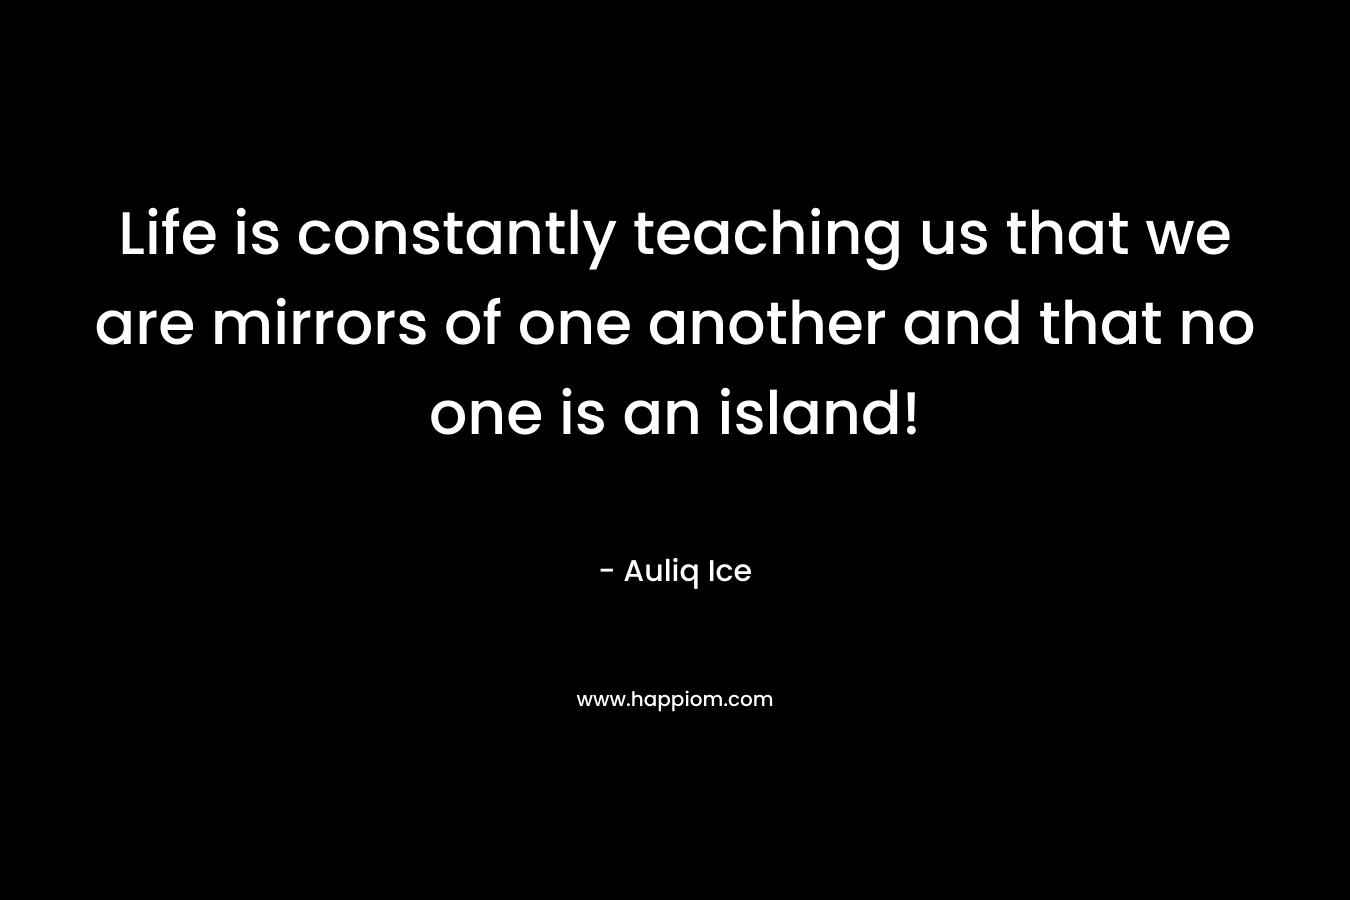 Life is constantly teaching us that we are mirrors of one another and that no one is an island!